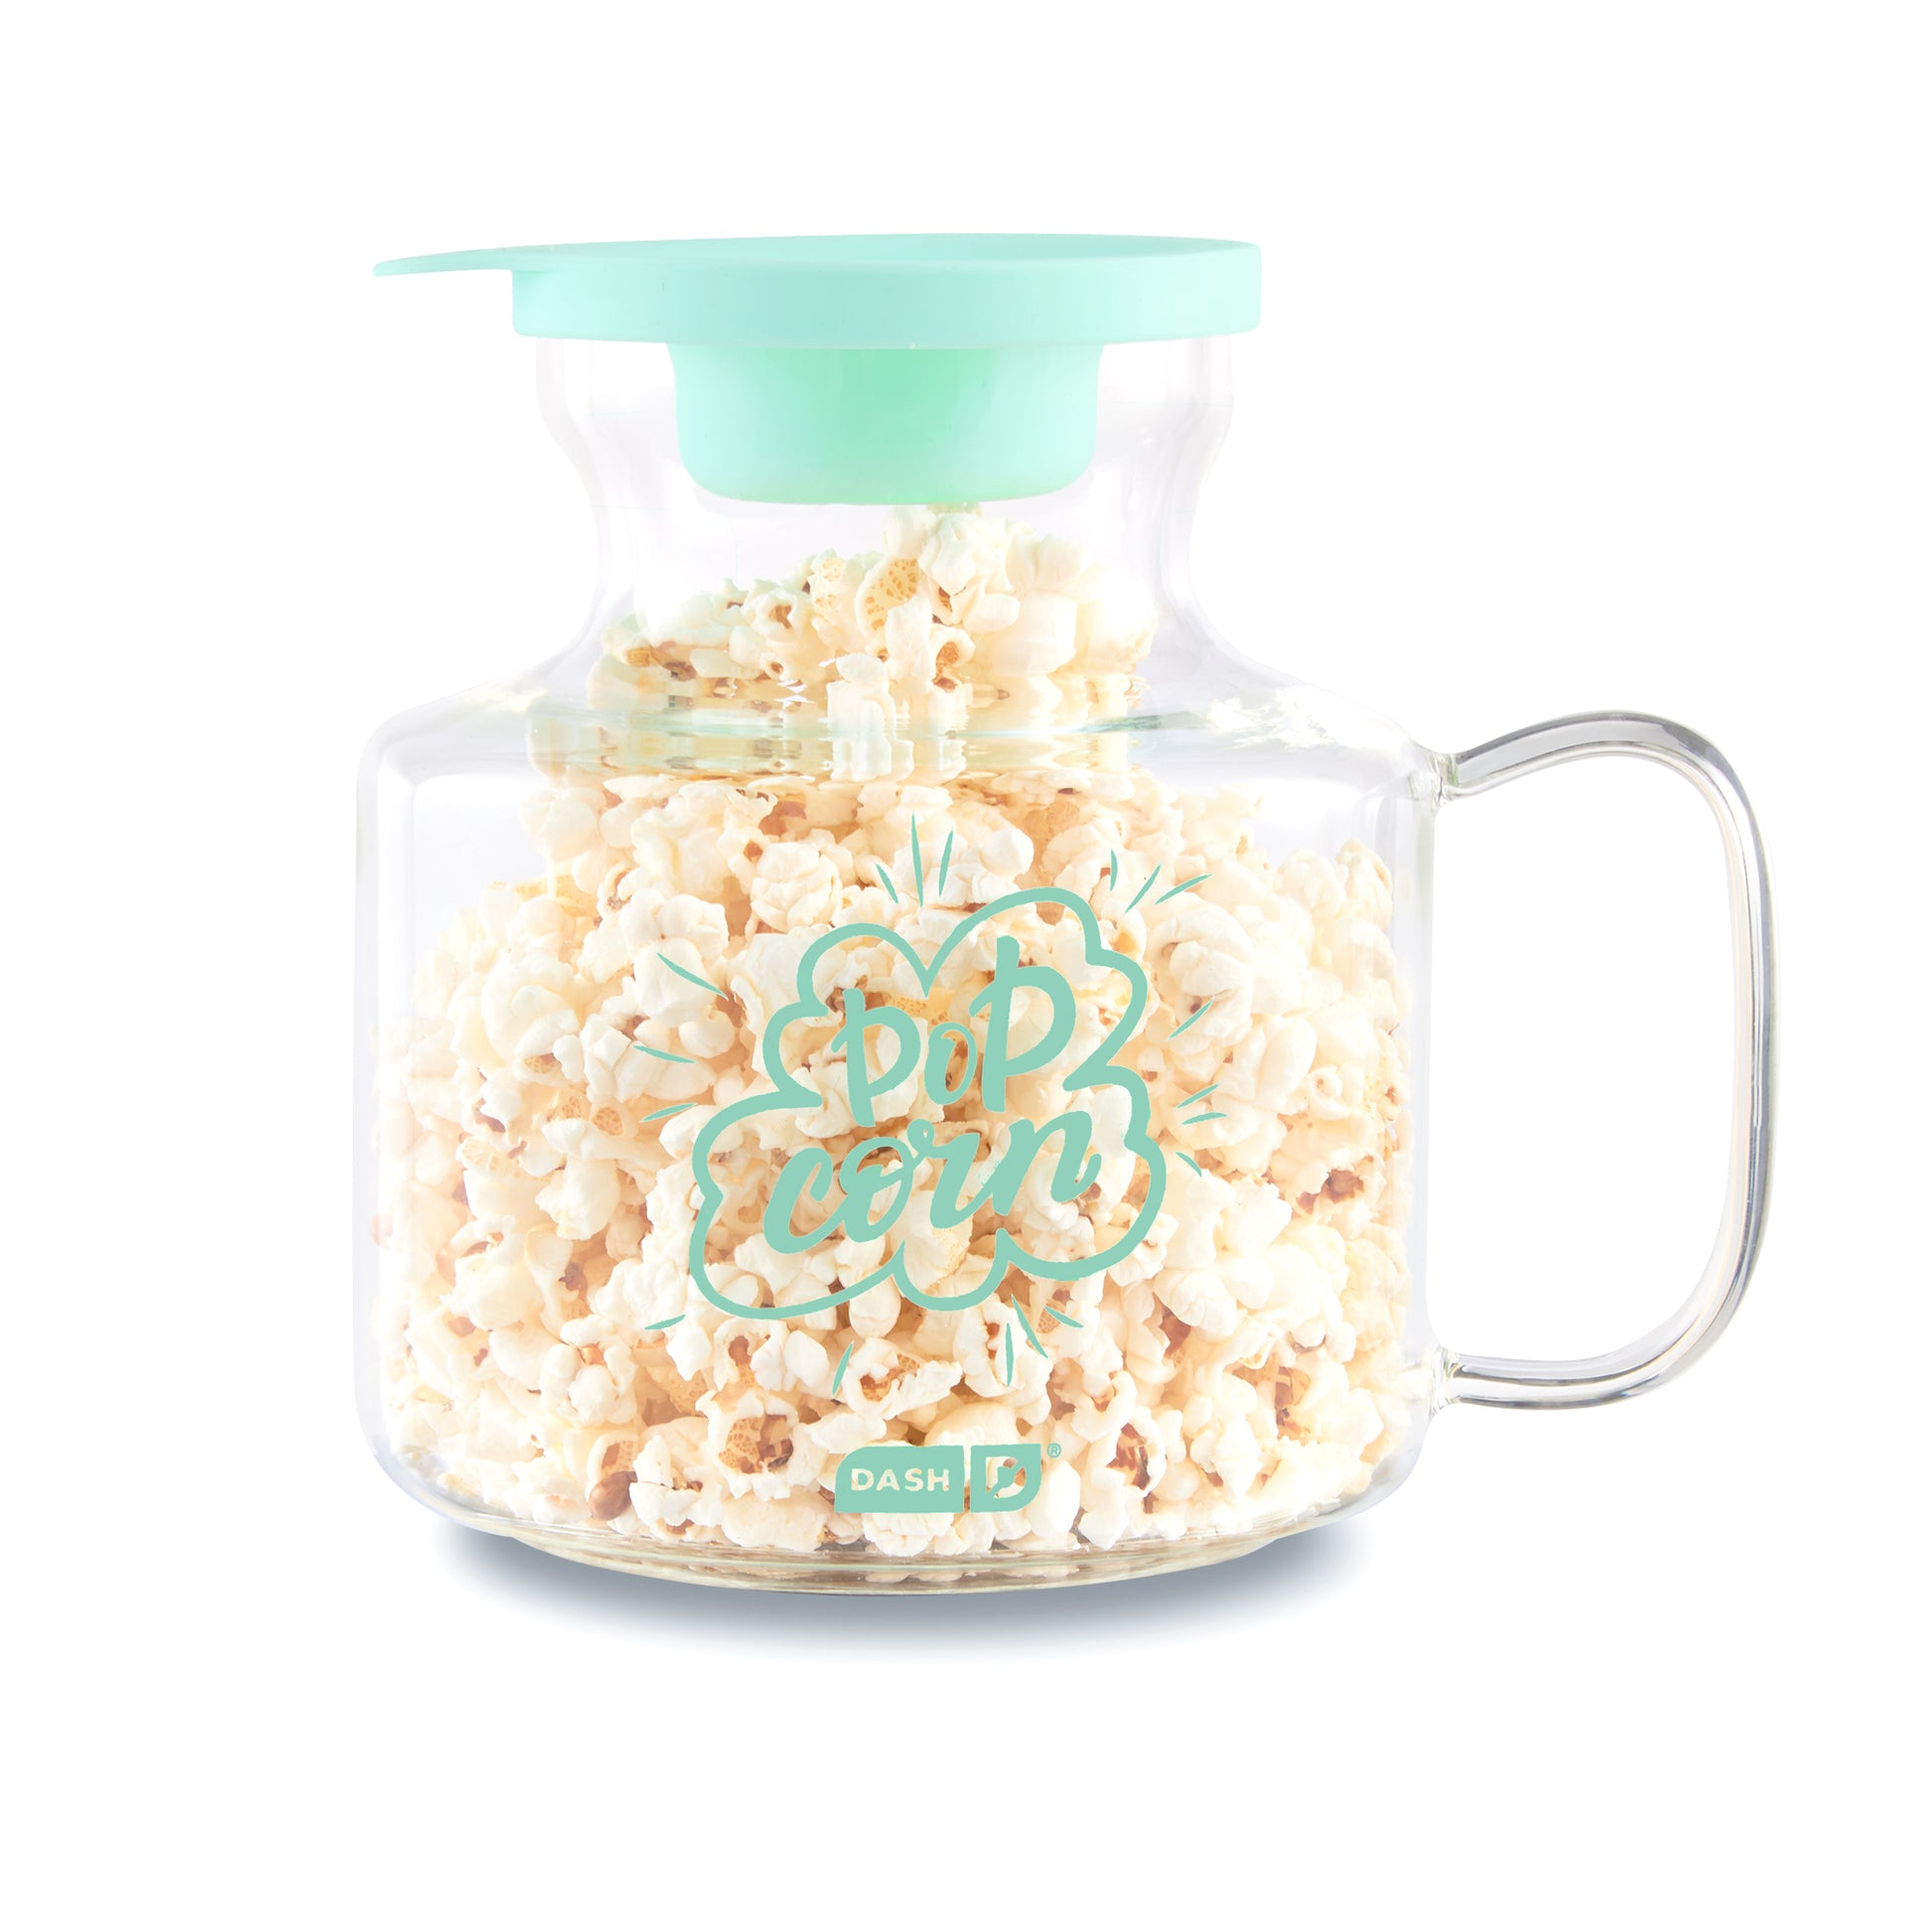 DASH Turbo POP Popcorn Maker with Measuring Cup to Portion Popping Corn  Kernels + Melt Butter, 8 Cup Popcorn Machine - Red